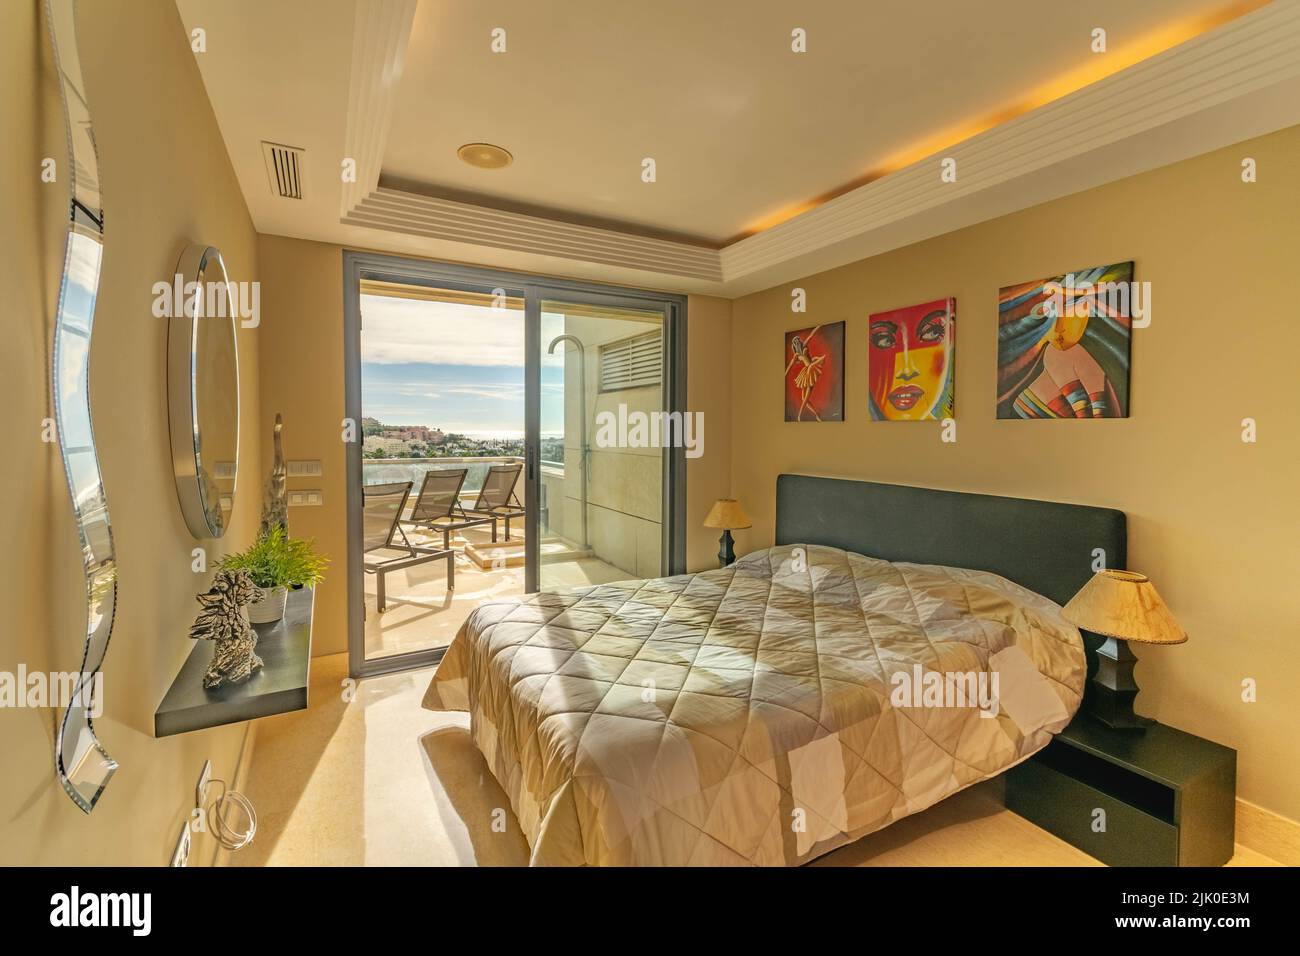 a view from inside one of the many rooms of a luxury apartment overlooking the Mediterranean coastline Stock Photo